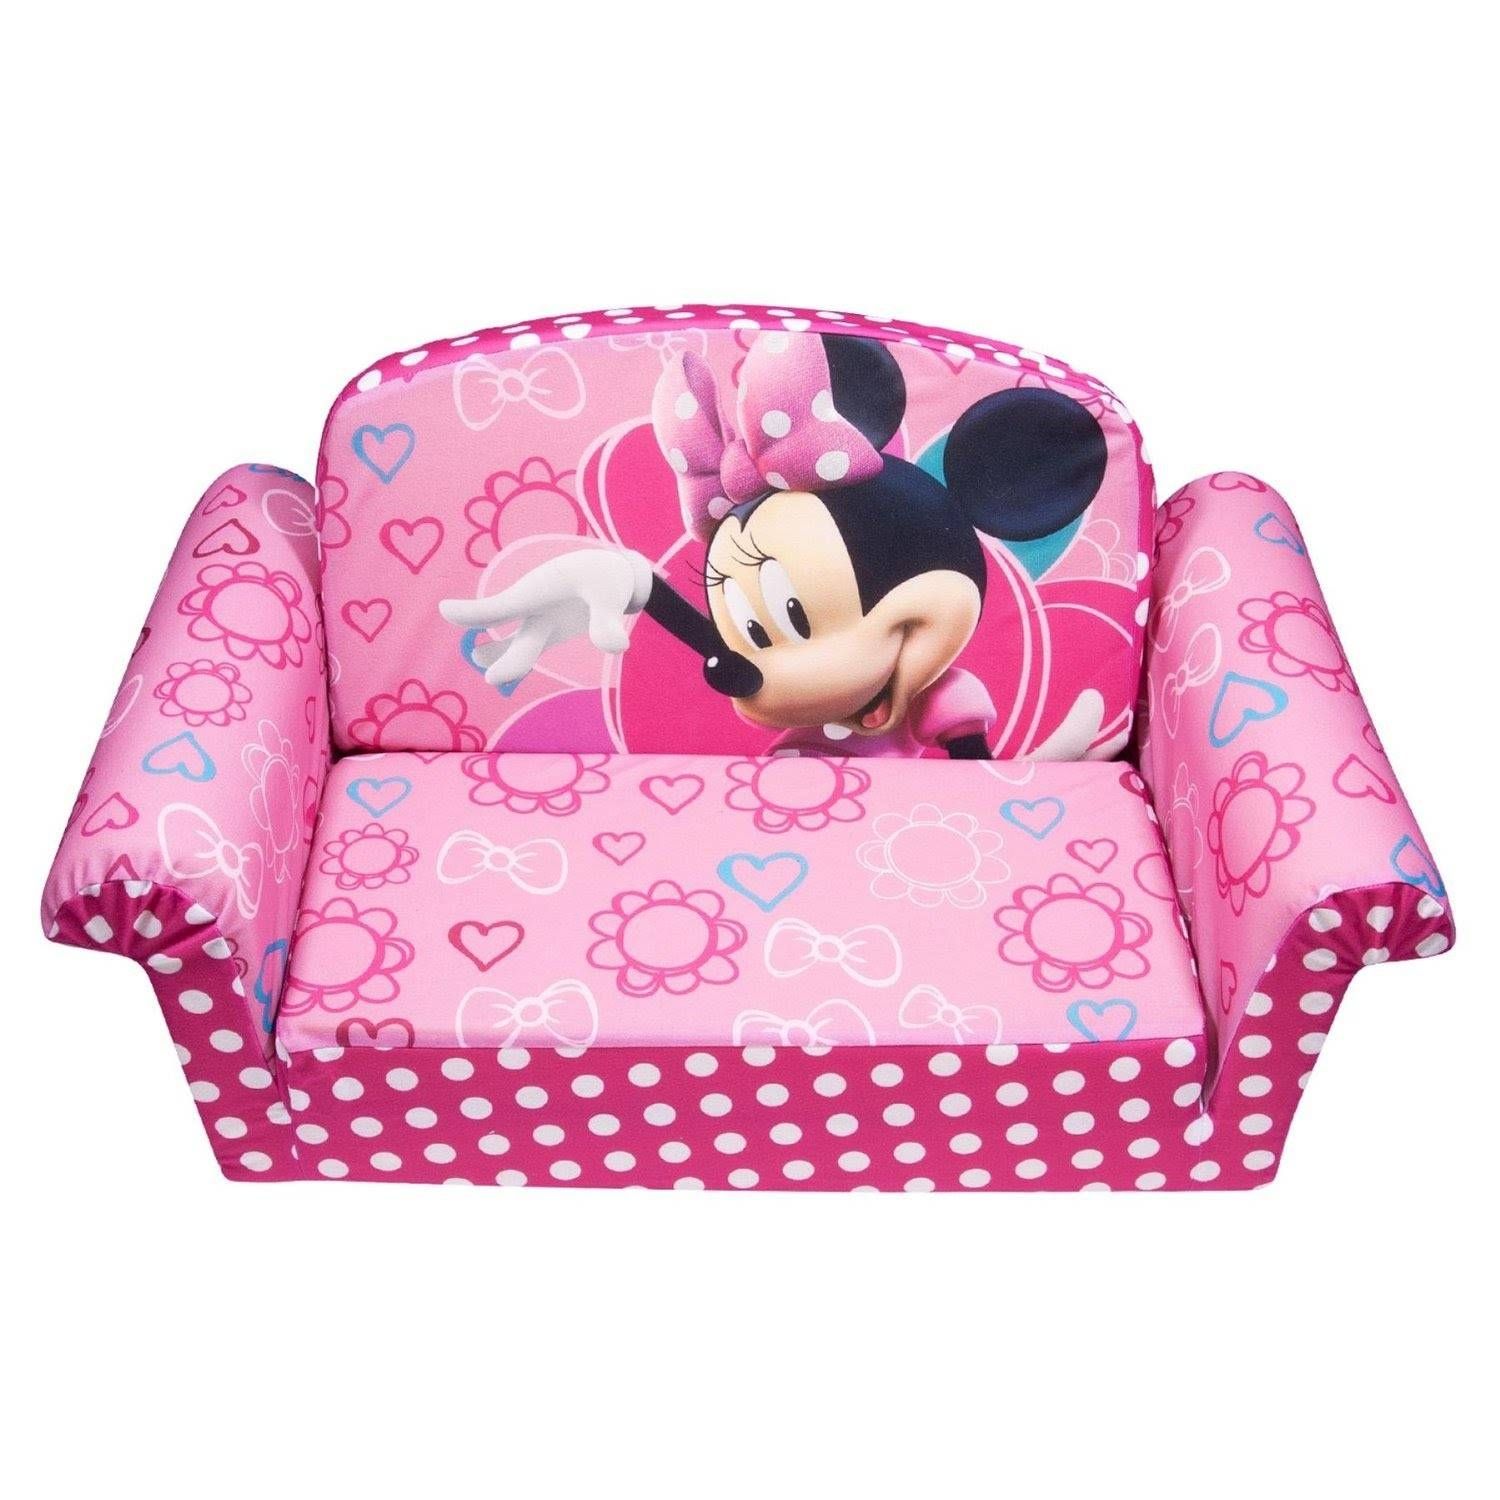 Review: Marshmallow Children's Furniture – 2 In 1 Flip Open Sofa Within Flip Out Sofa For Kids (Photo 15 of 30)